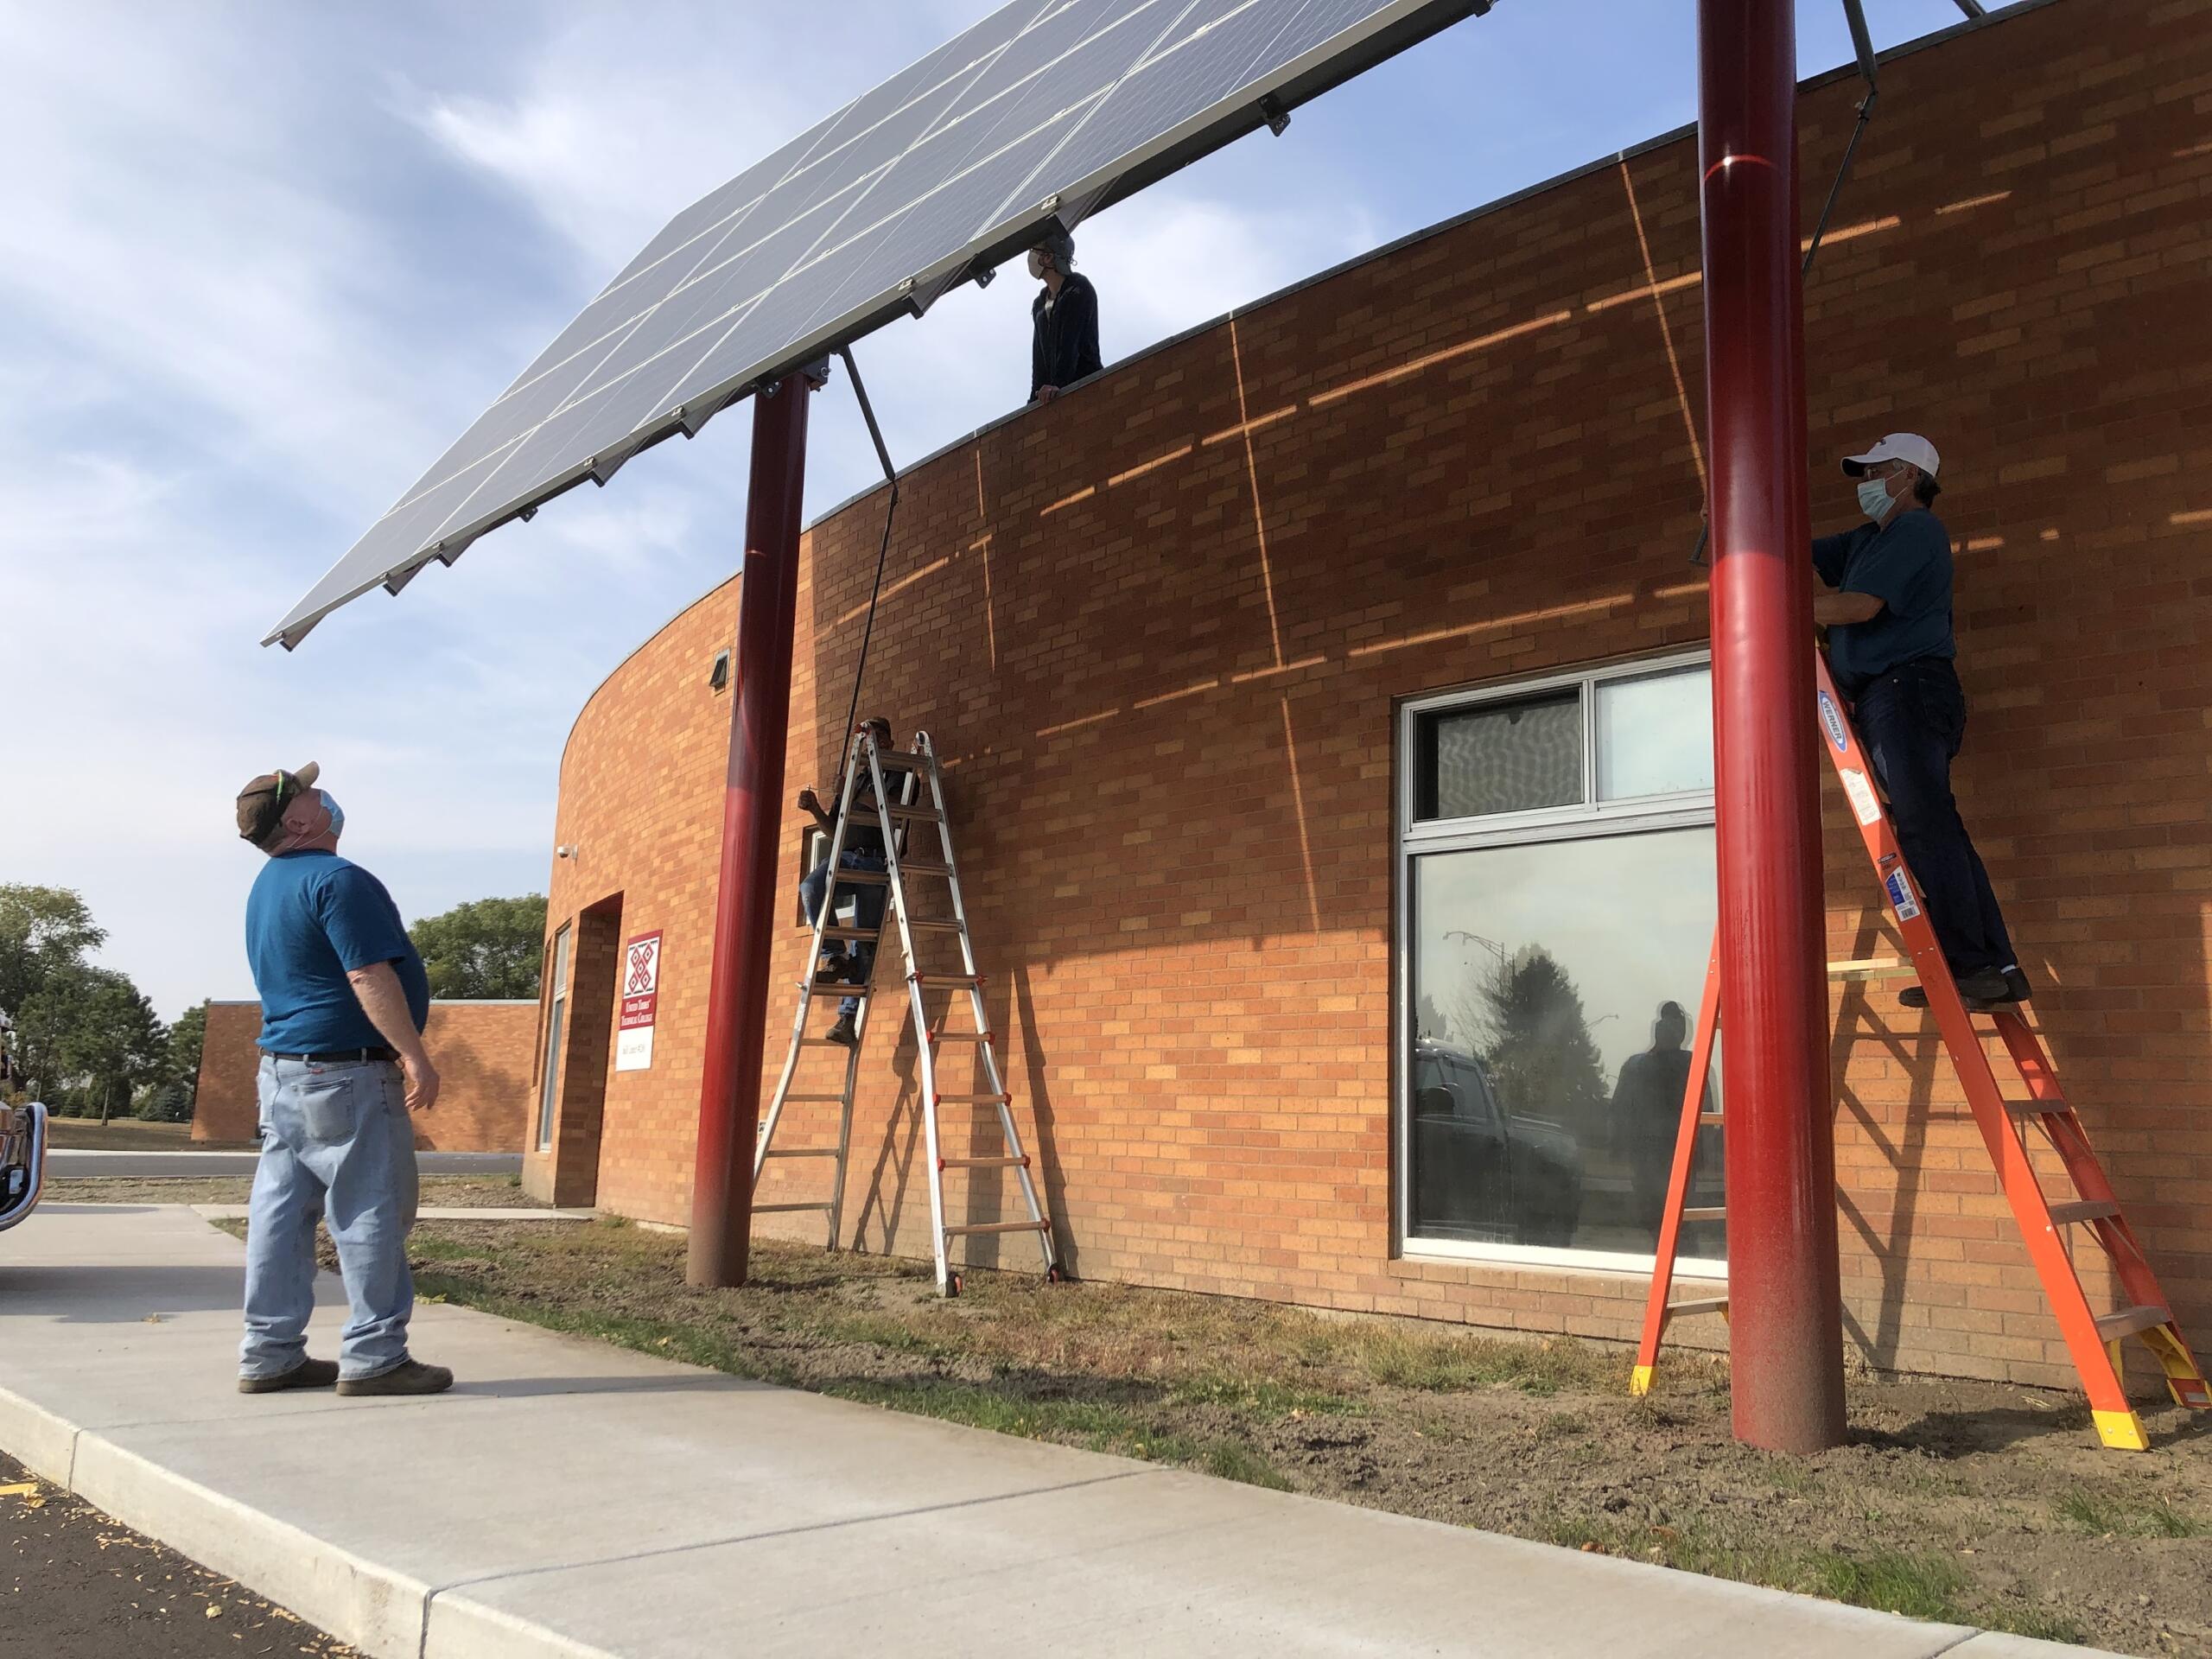 A skilled installation crew uses ladders to ascend and secure the critical components of a solar panel installation